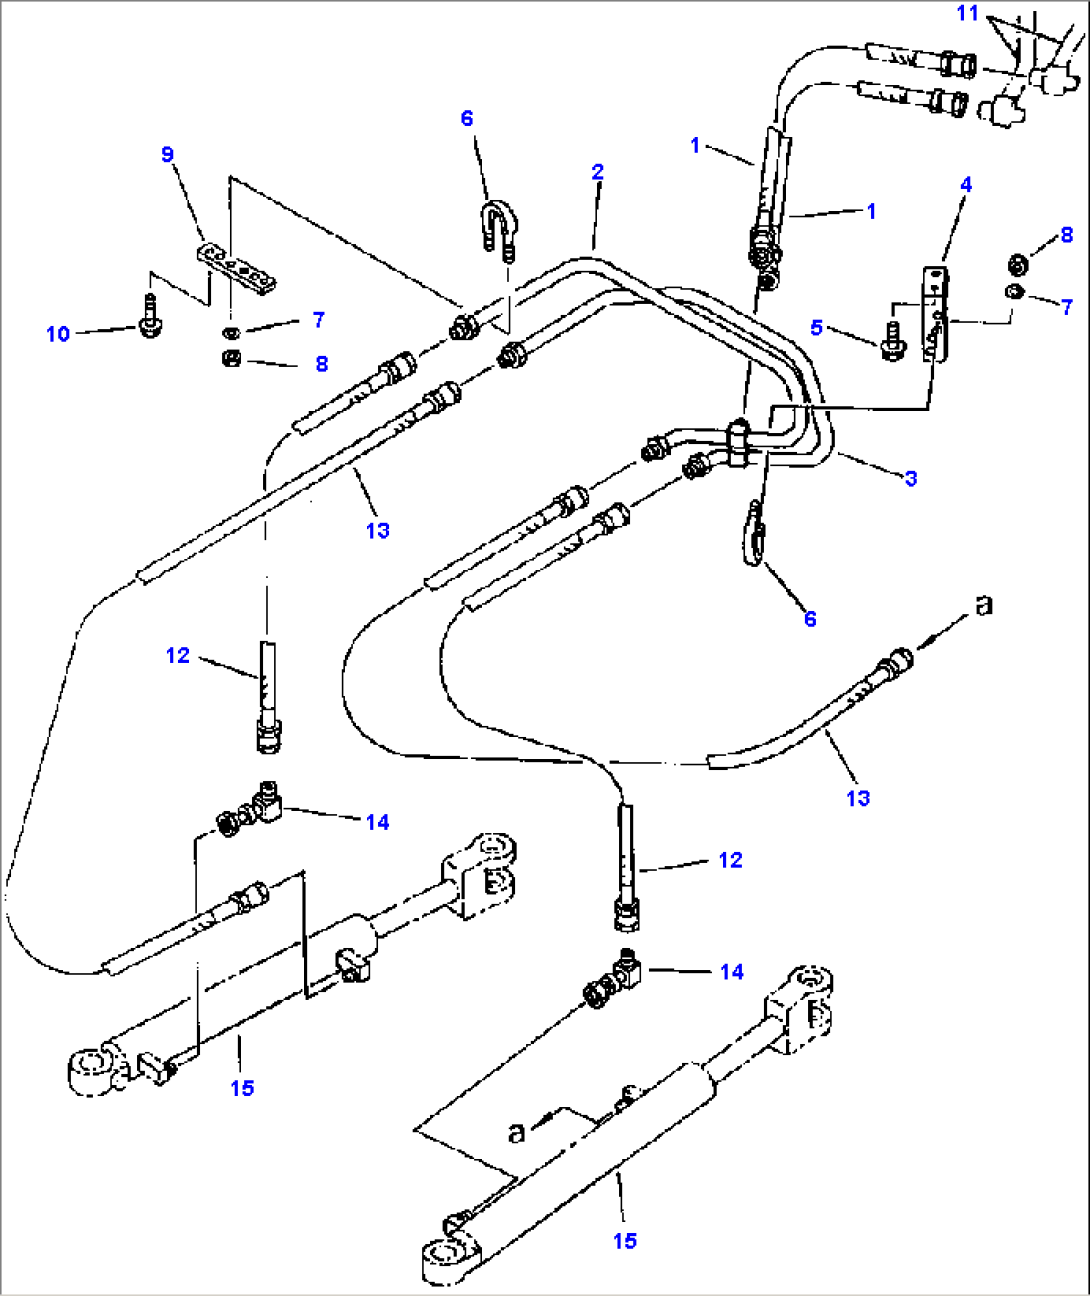 STEERING OIL PIPING CUSHION VALVE TO STEERING CYLINDERS